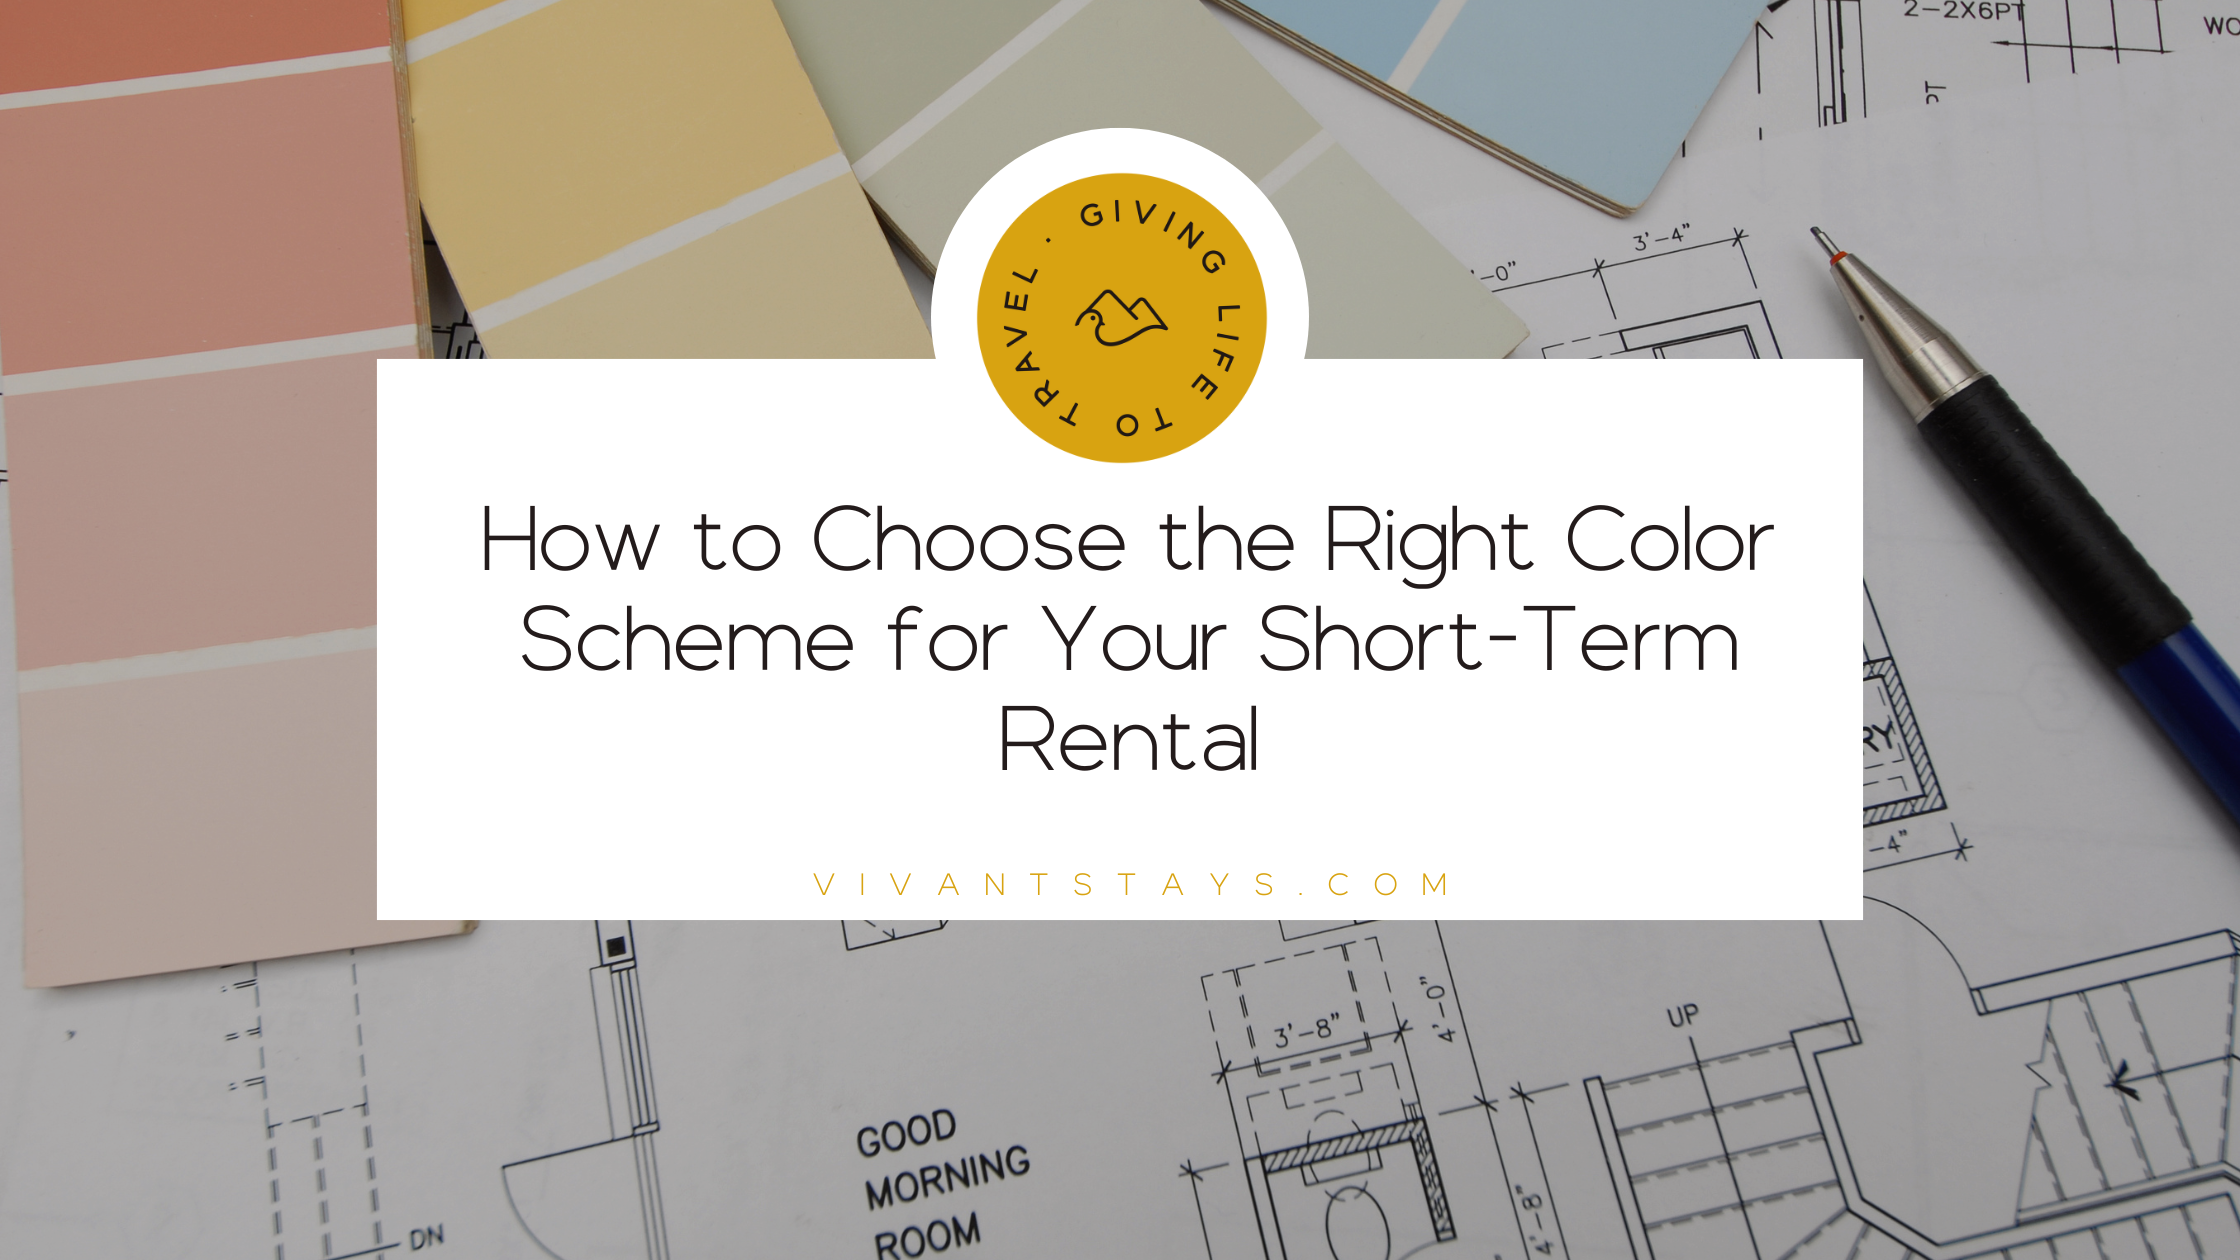 Vivant's blog banner titled "How to Choose The Right Color Scheme for Your Short Term Rental"